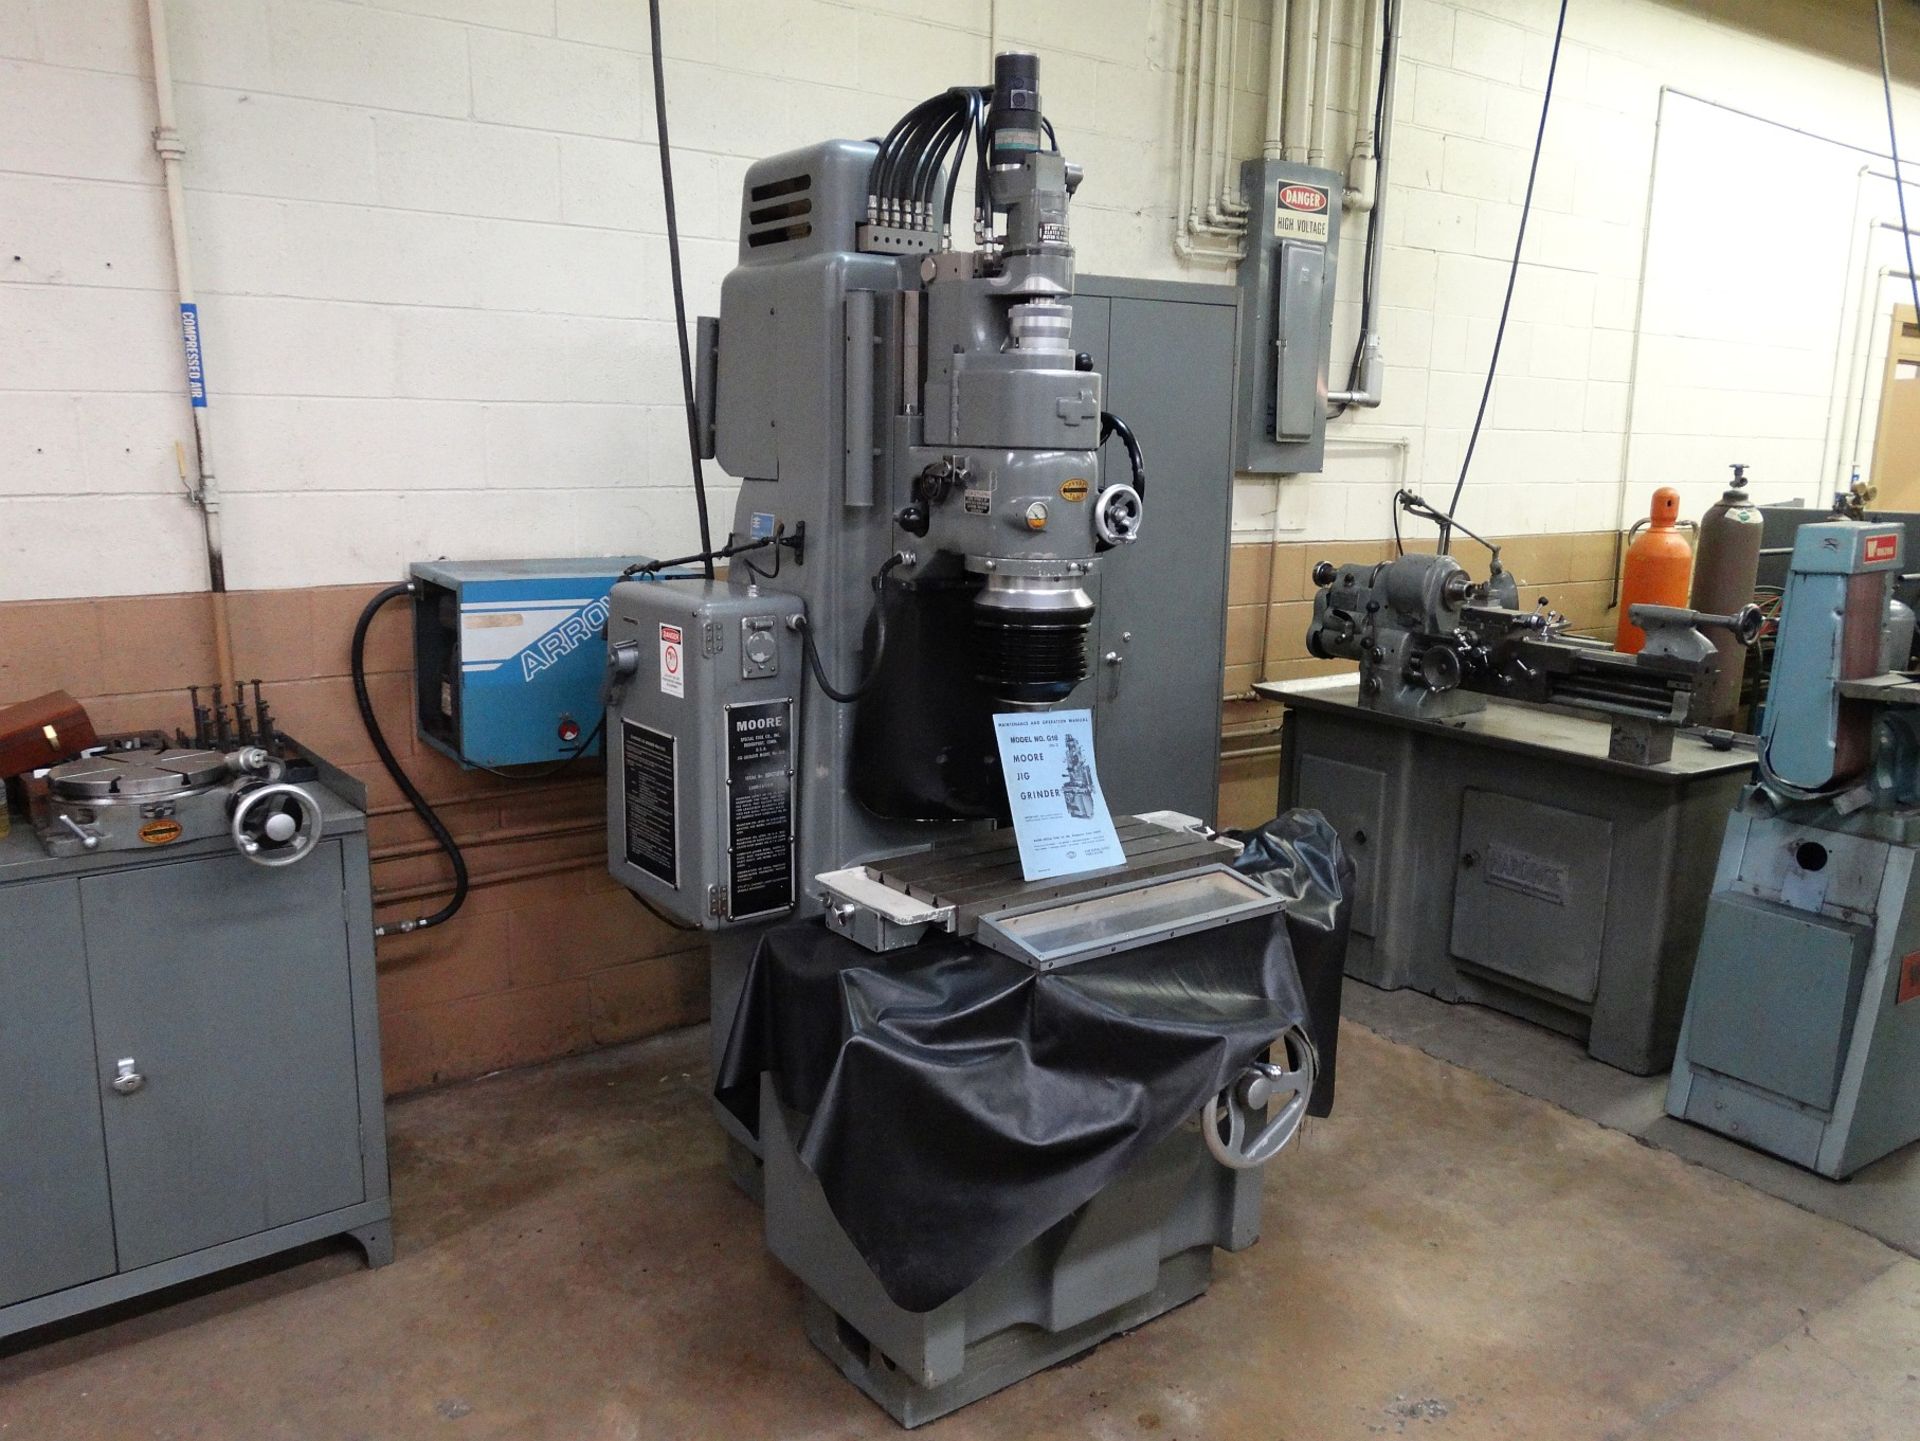 Moore Jig Grinder, Mdl G18 (No. 3), 11" x 24" Tab 11" x 18" Travel, 13.5" Spindle to Column, 2"- - Image 2 of 6